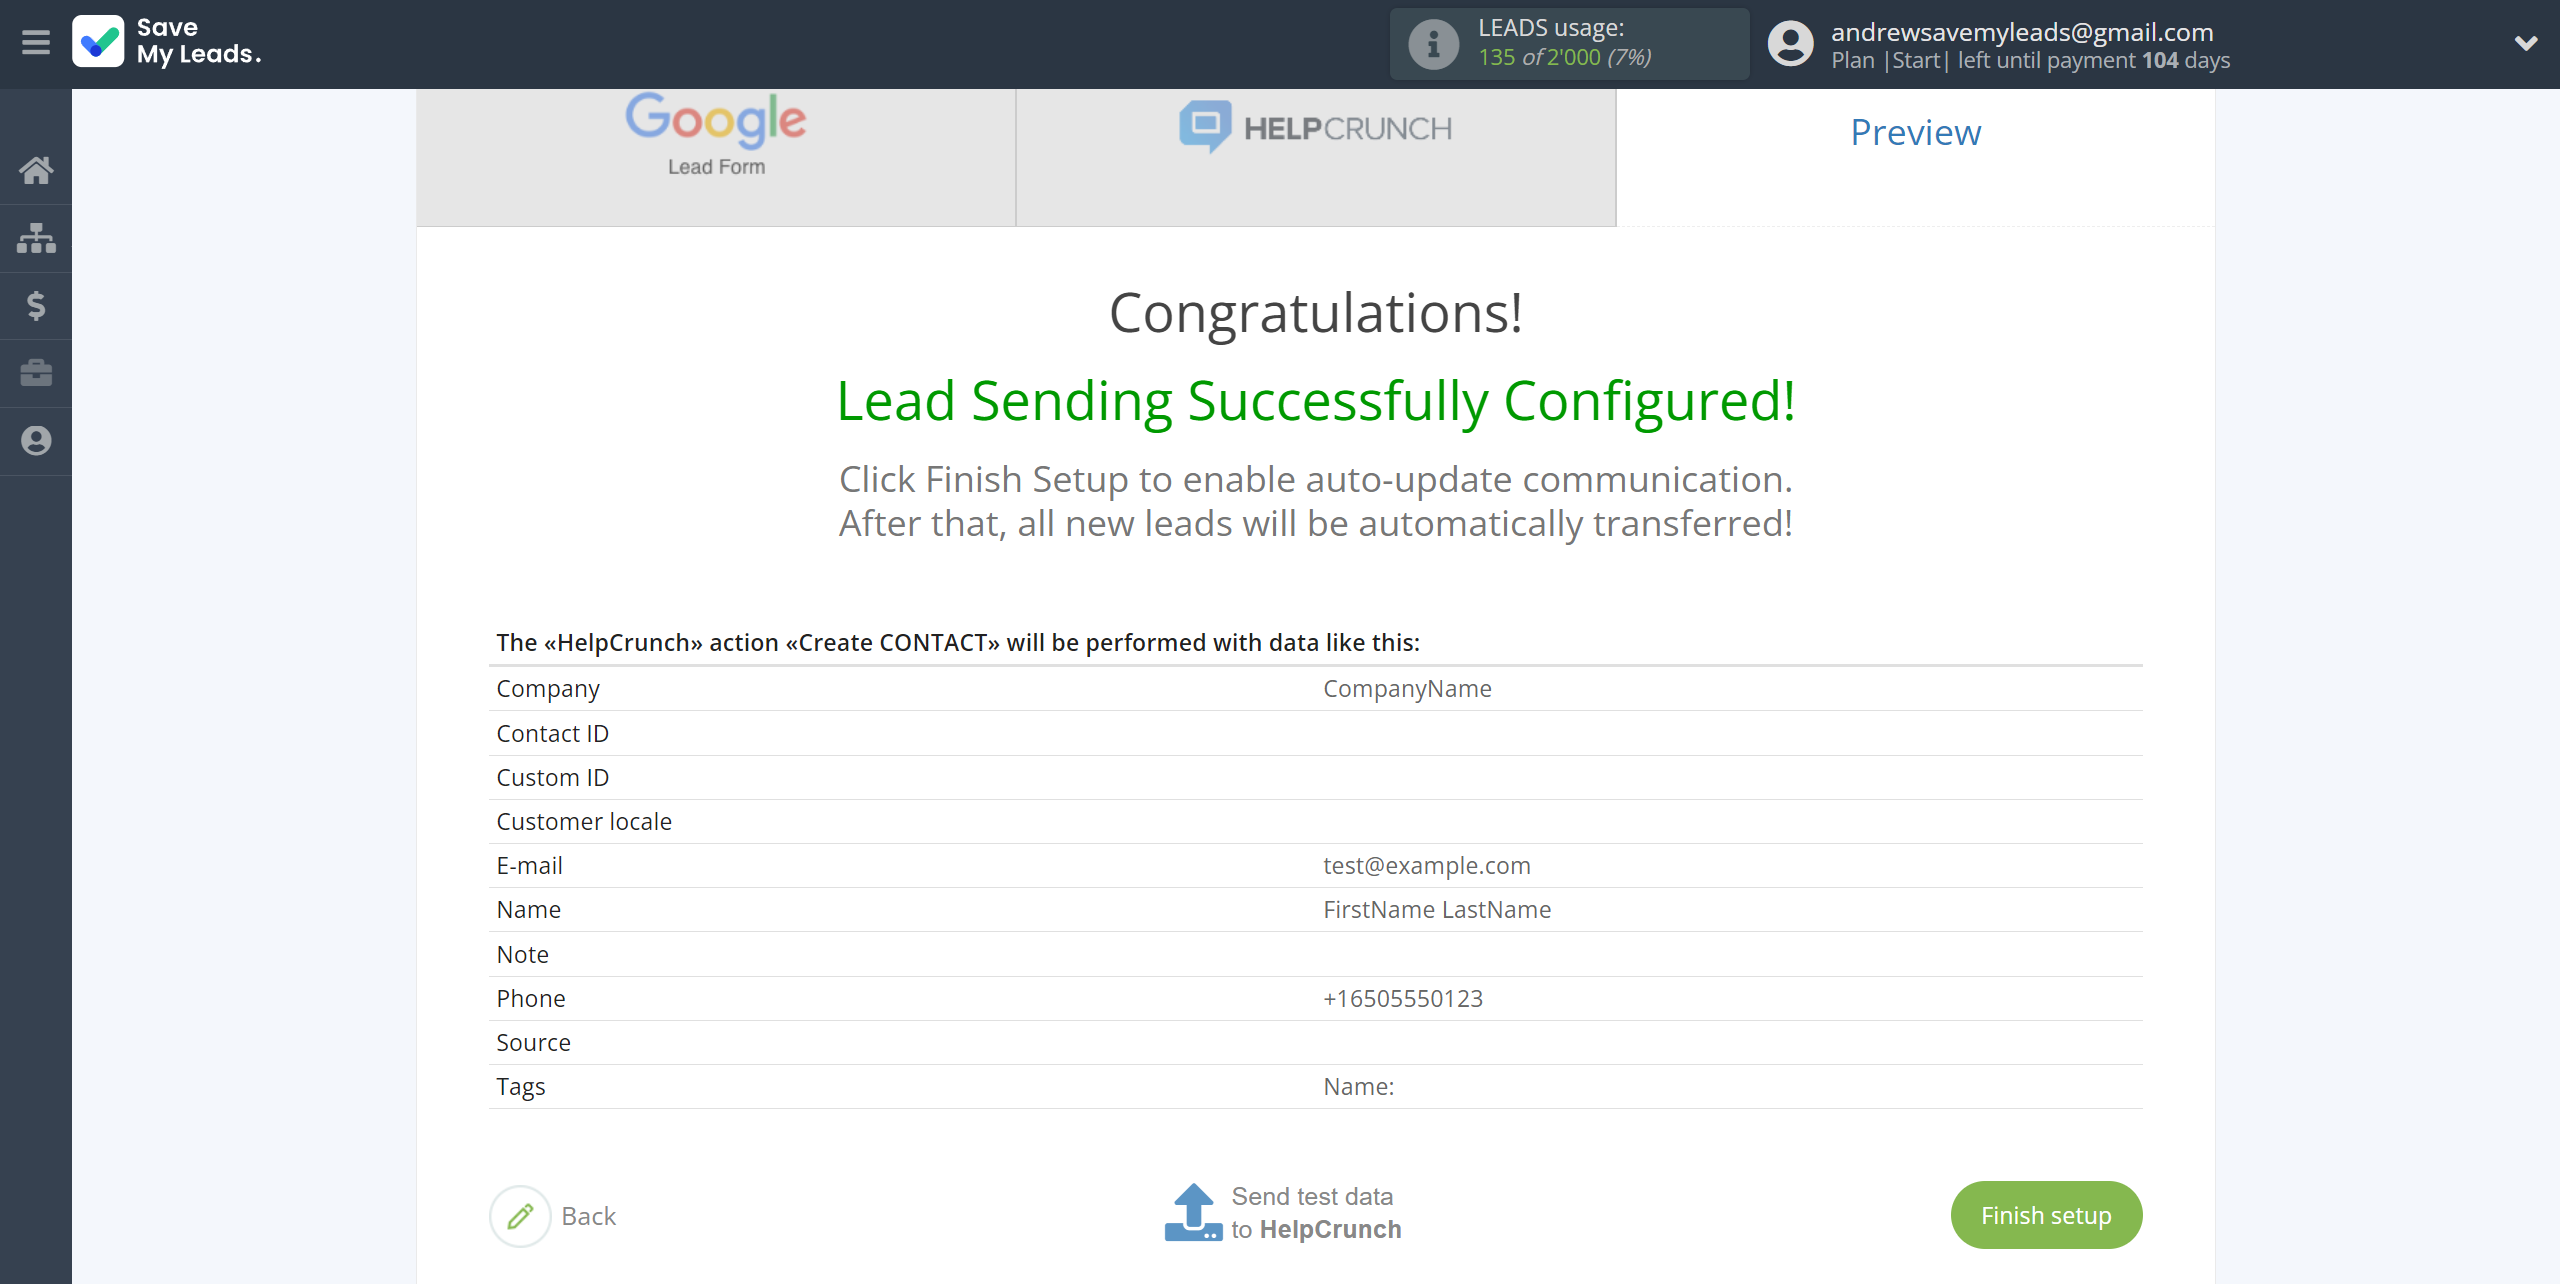 How to Connect Google Lead Form with HelpCrunch Create Contacts | Test data